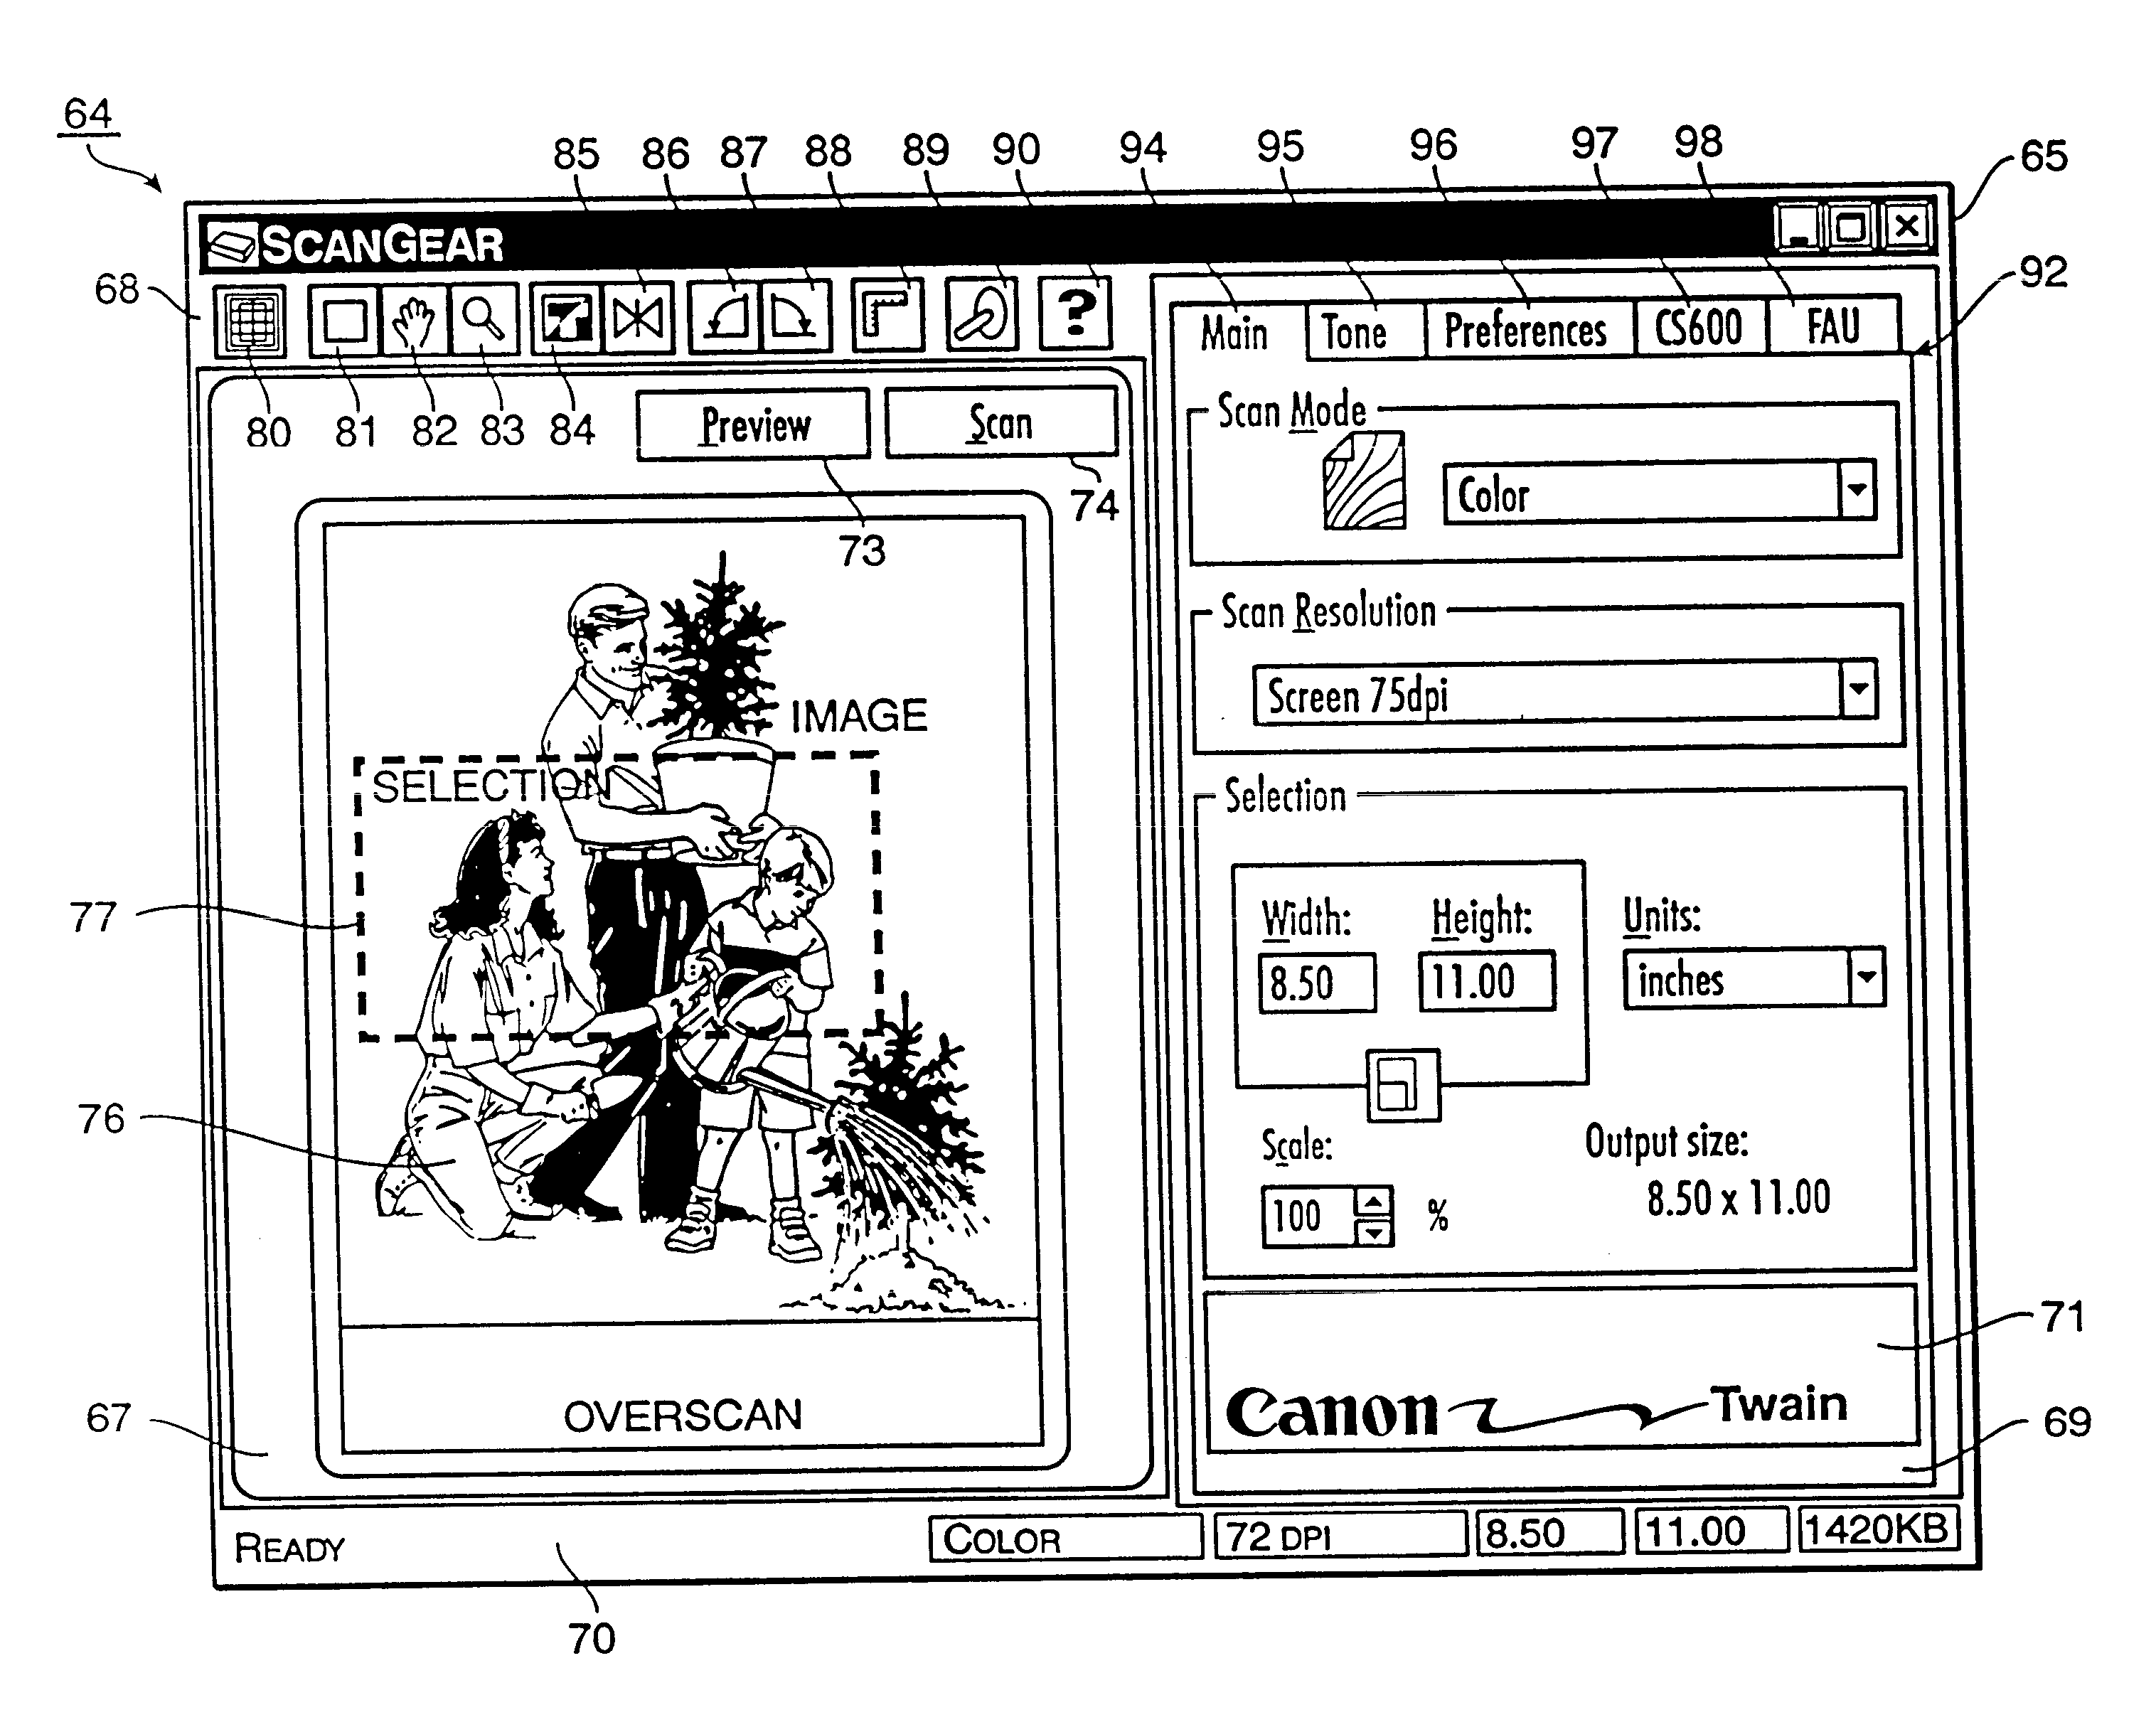 User interface for image acquisition devices